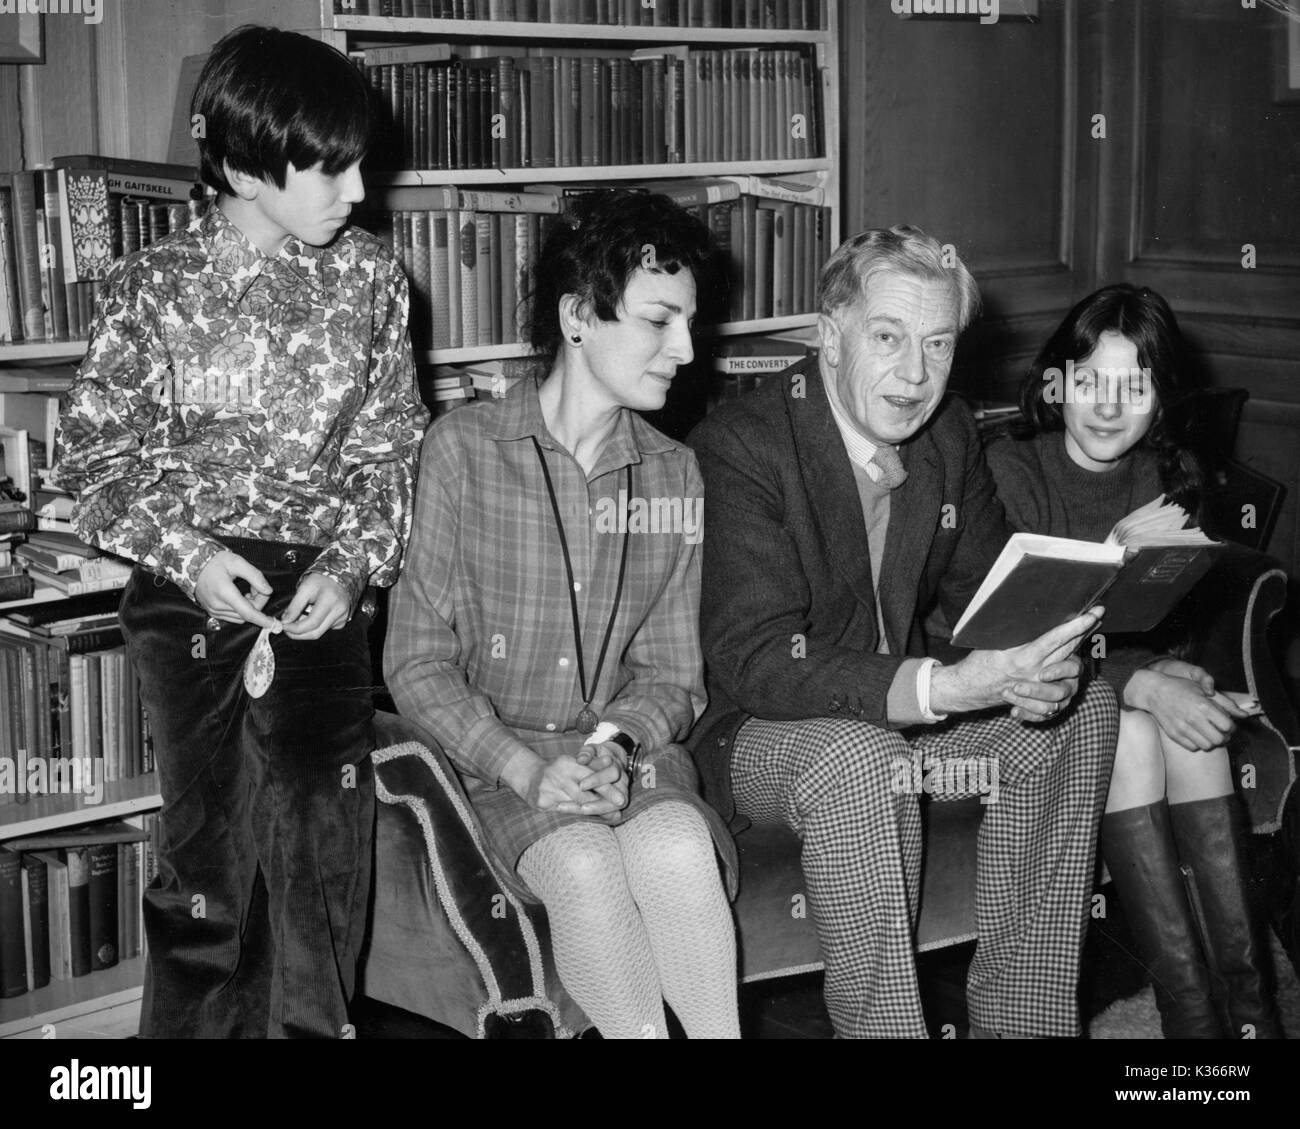 DANIEL DAY-LEWIS, JILL BALCON, CECIL DAY-LEWIS AND TAMASIN DAY-LEWIS IN 1968 Stock Photo